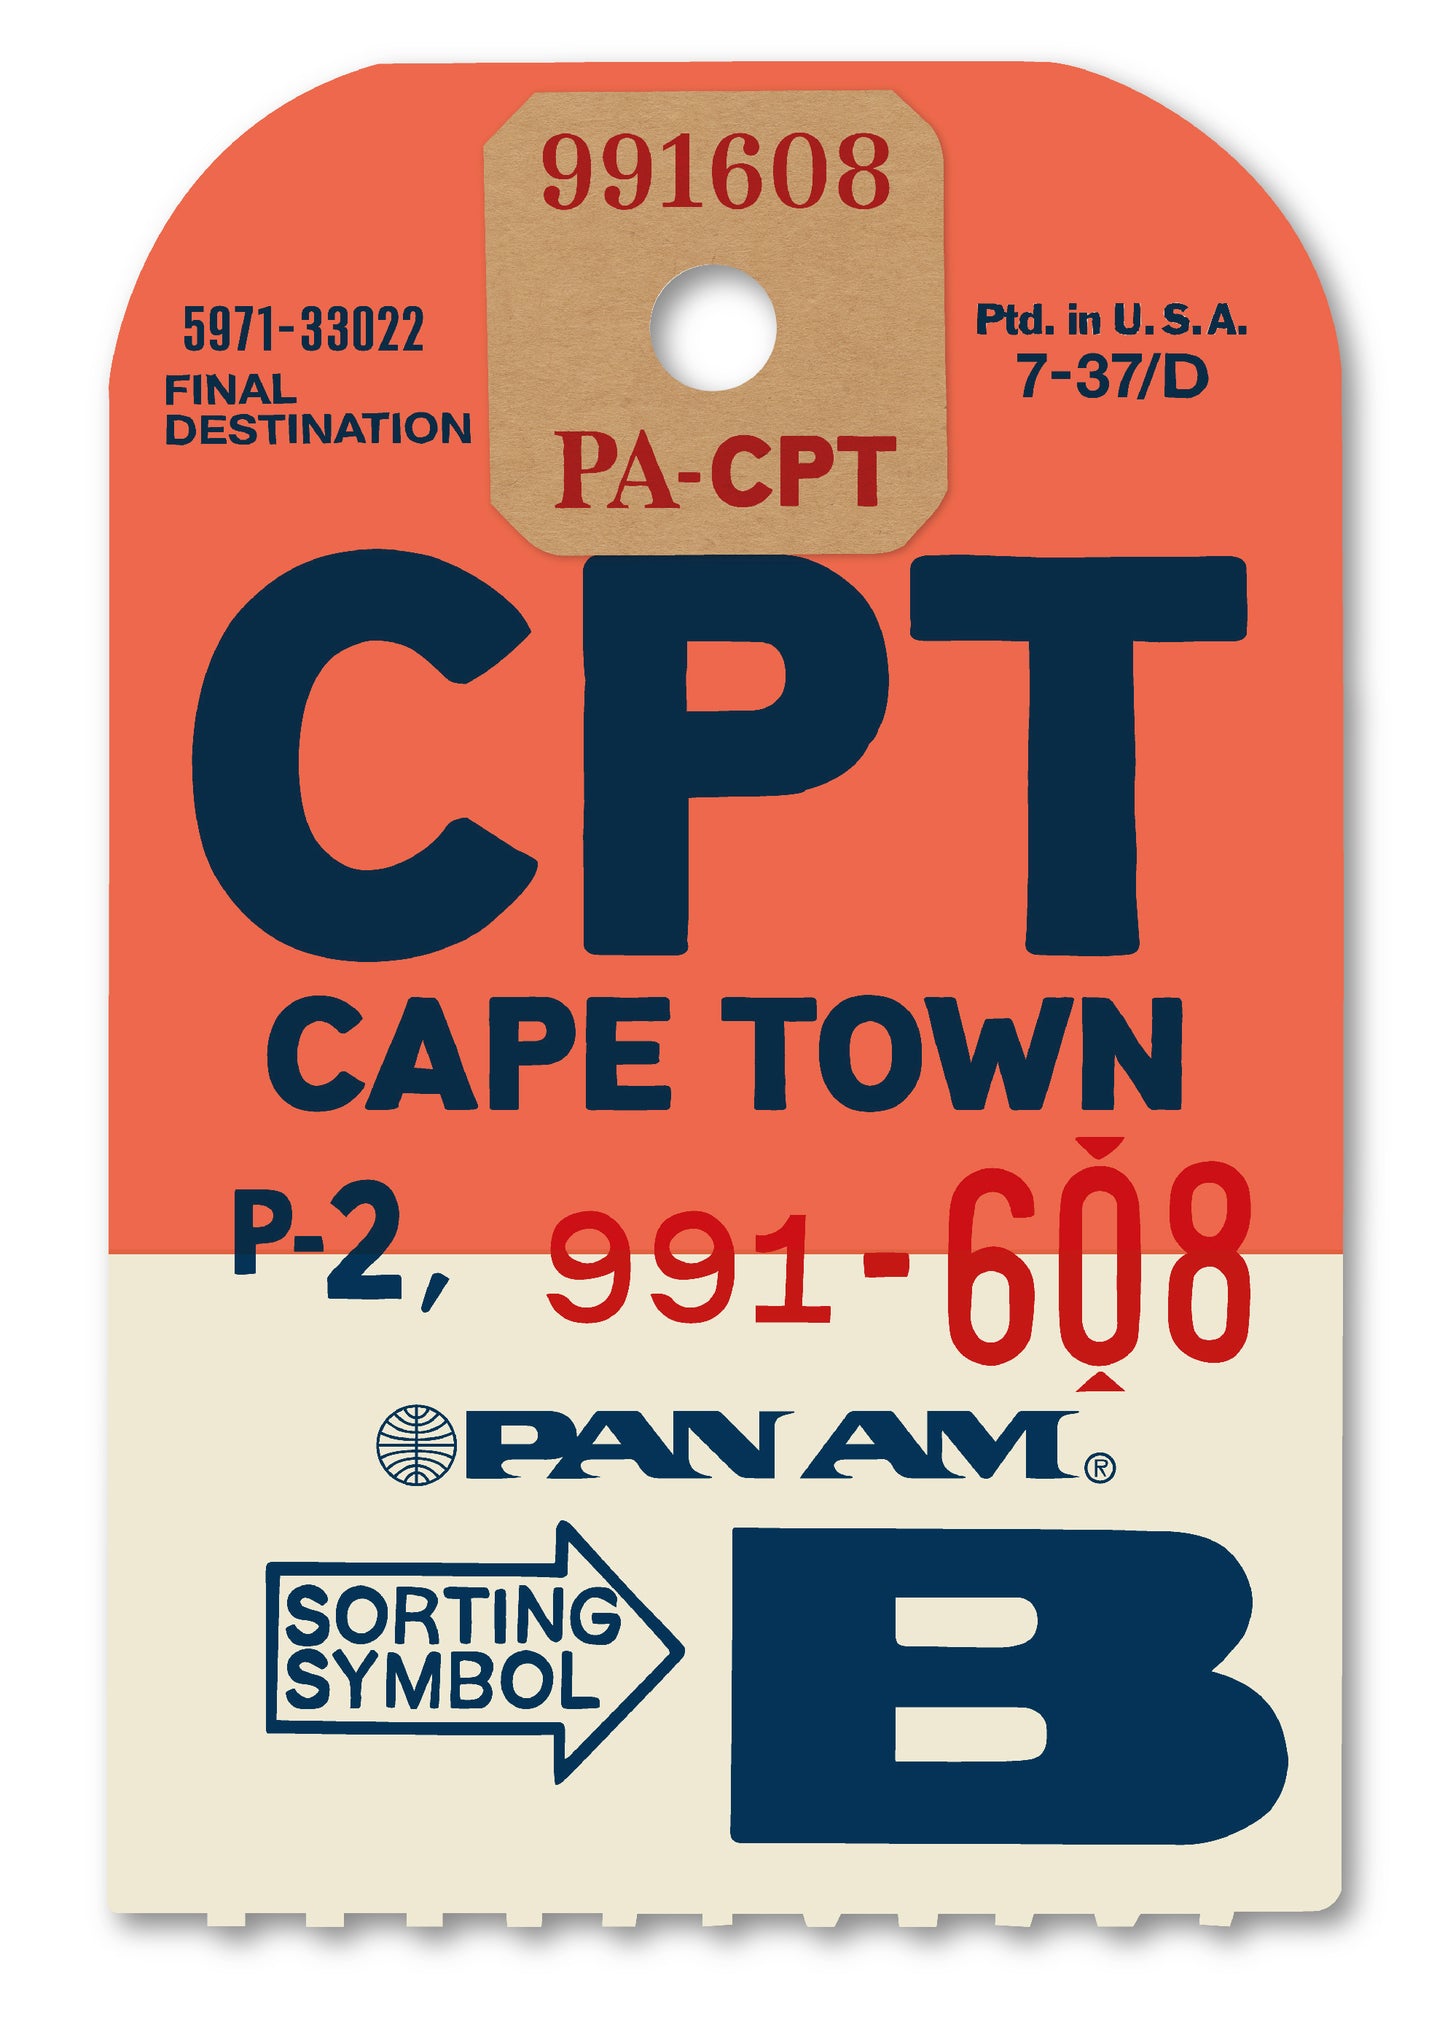 PAN AM ‘CAPE TOWN’ LUGGAGE TAG